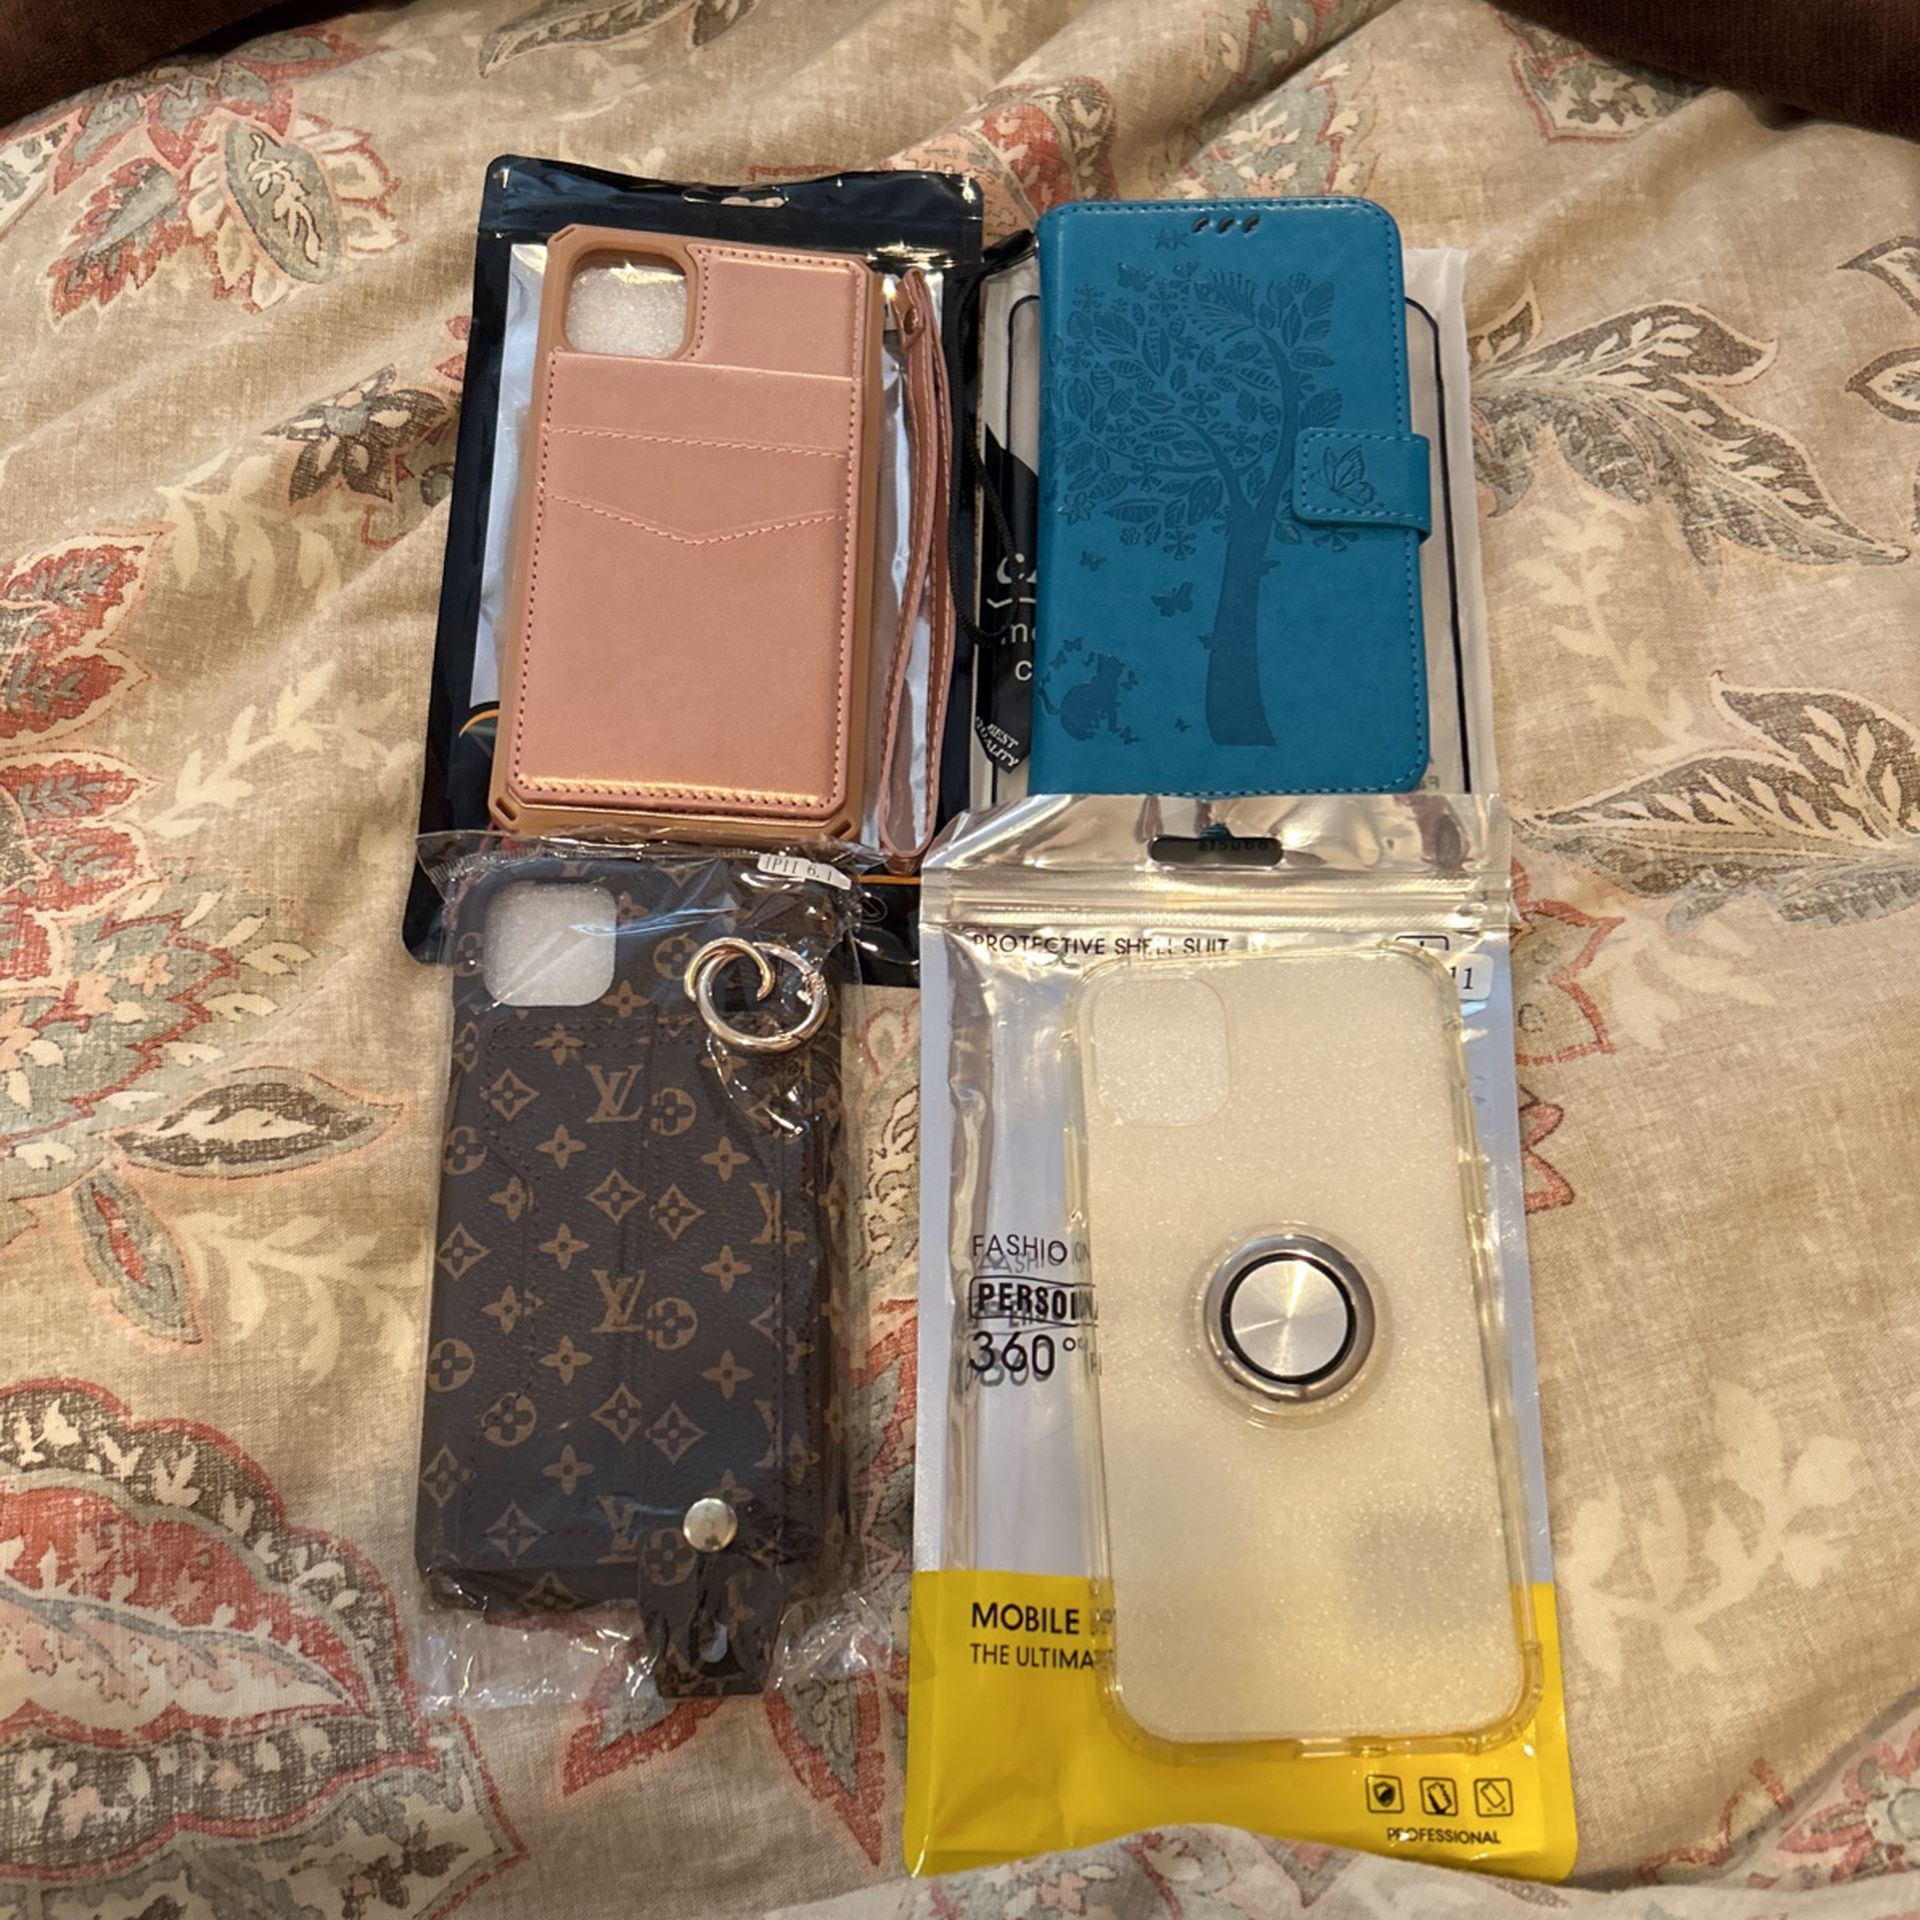 Iphone 11 Cases All 4 For Only $6 Total New!